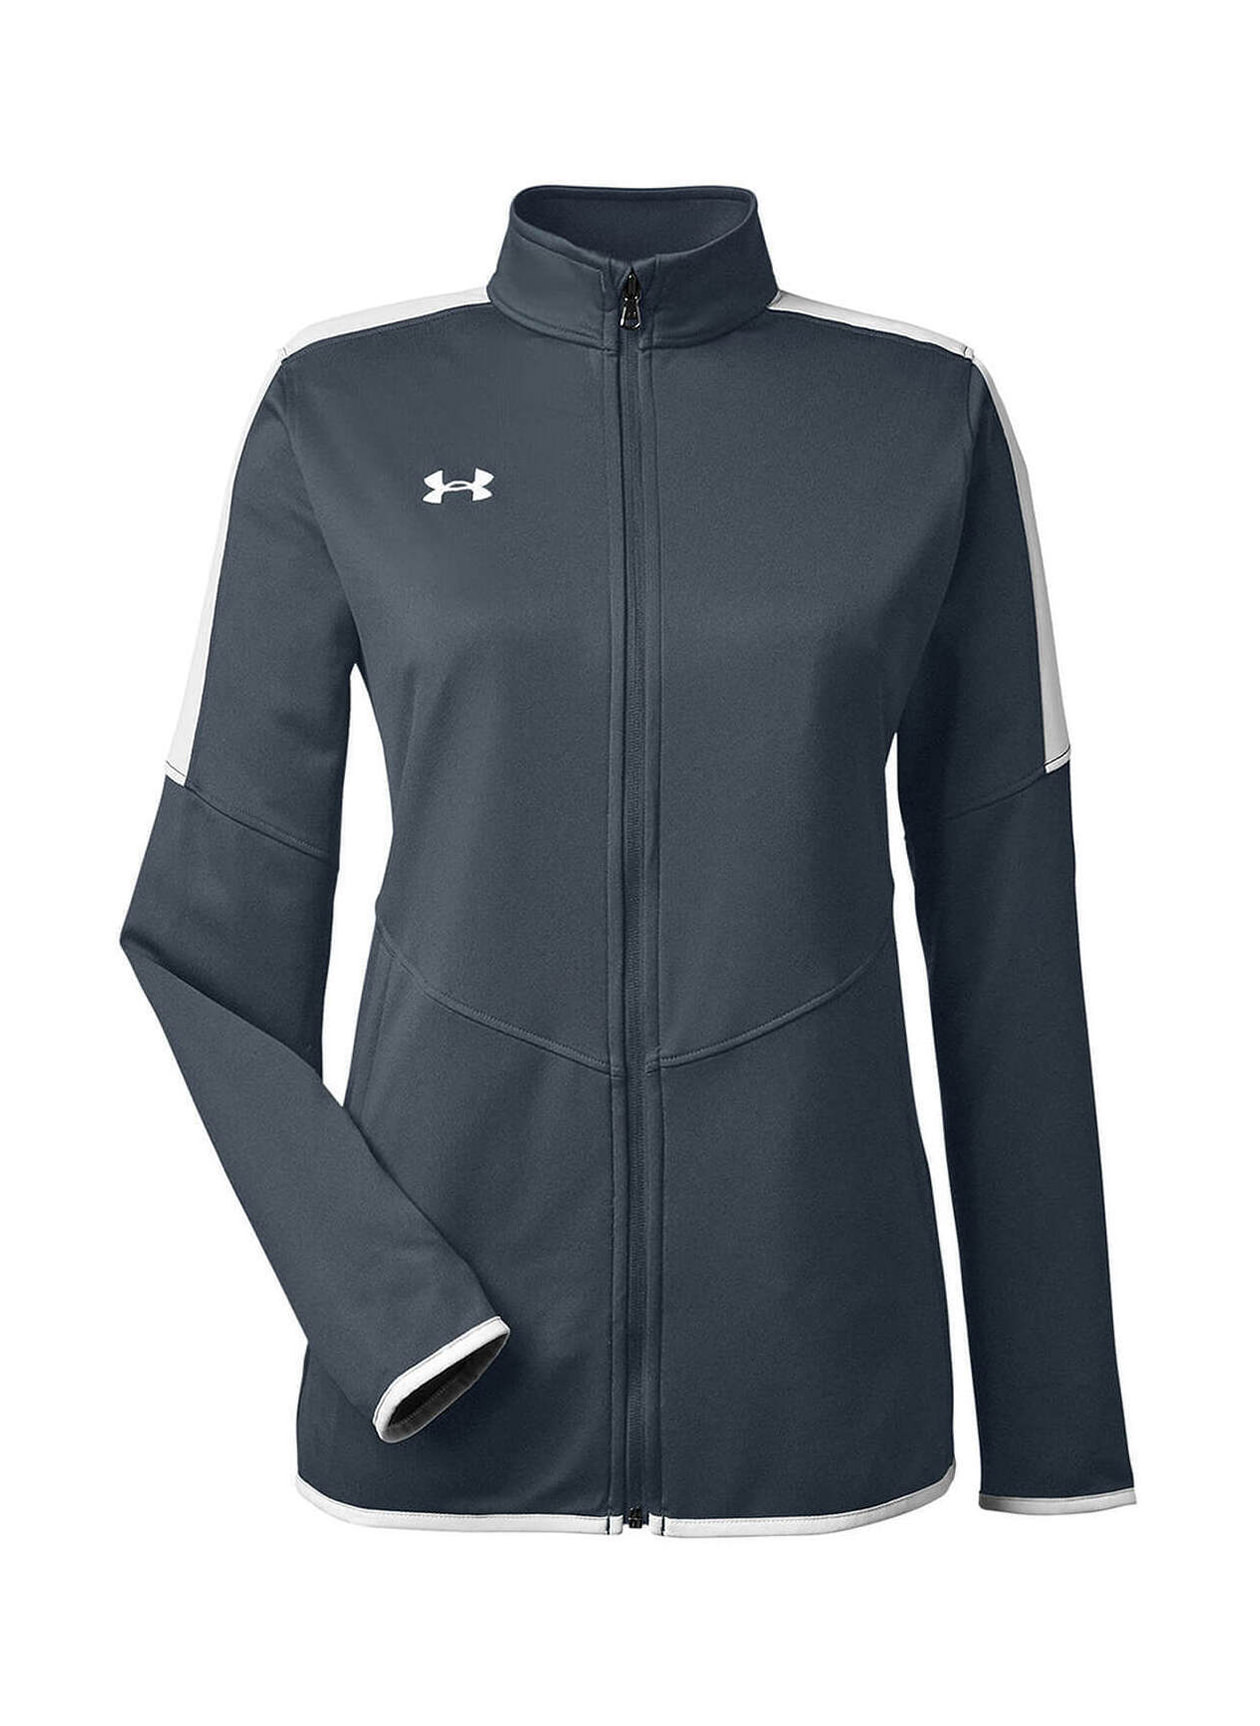 Under Armour Women's Stealth Rival Knit Jacket